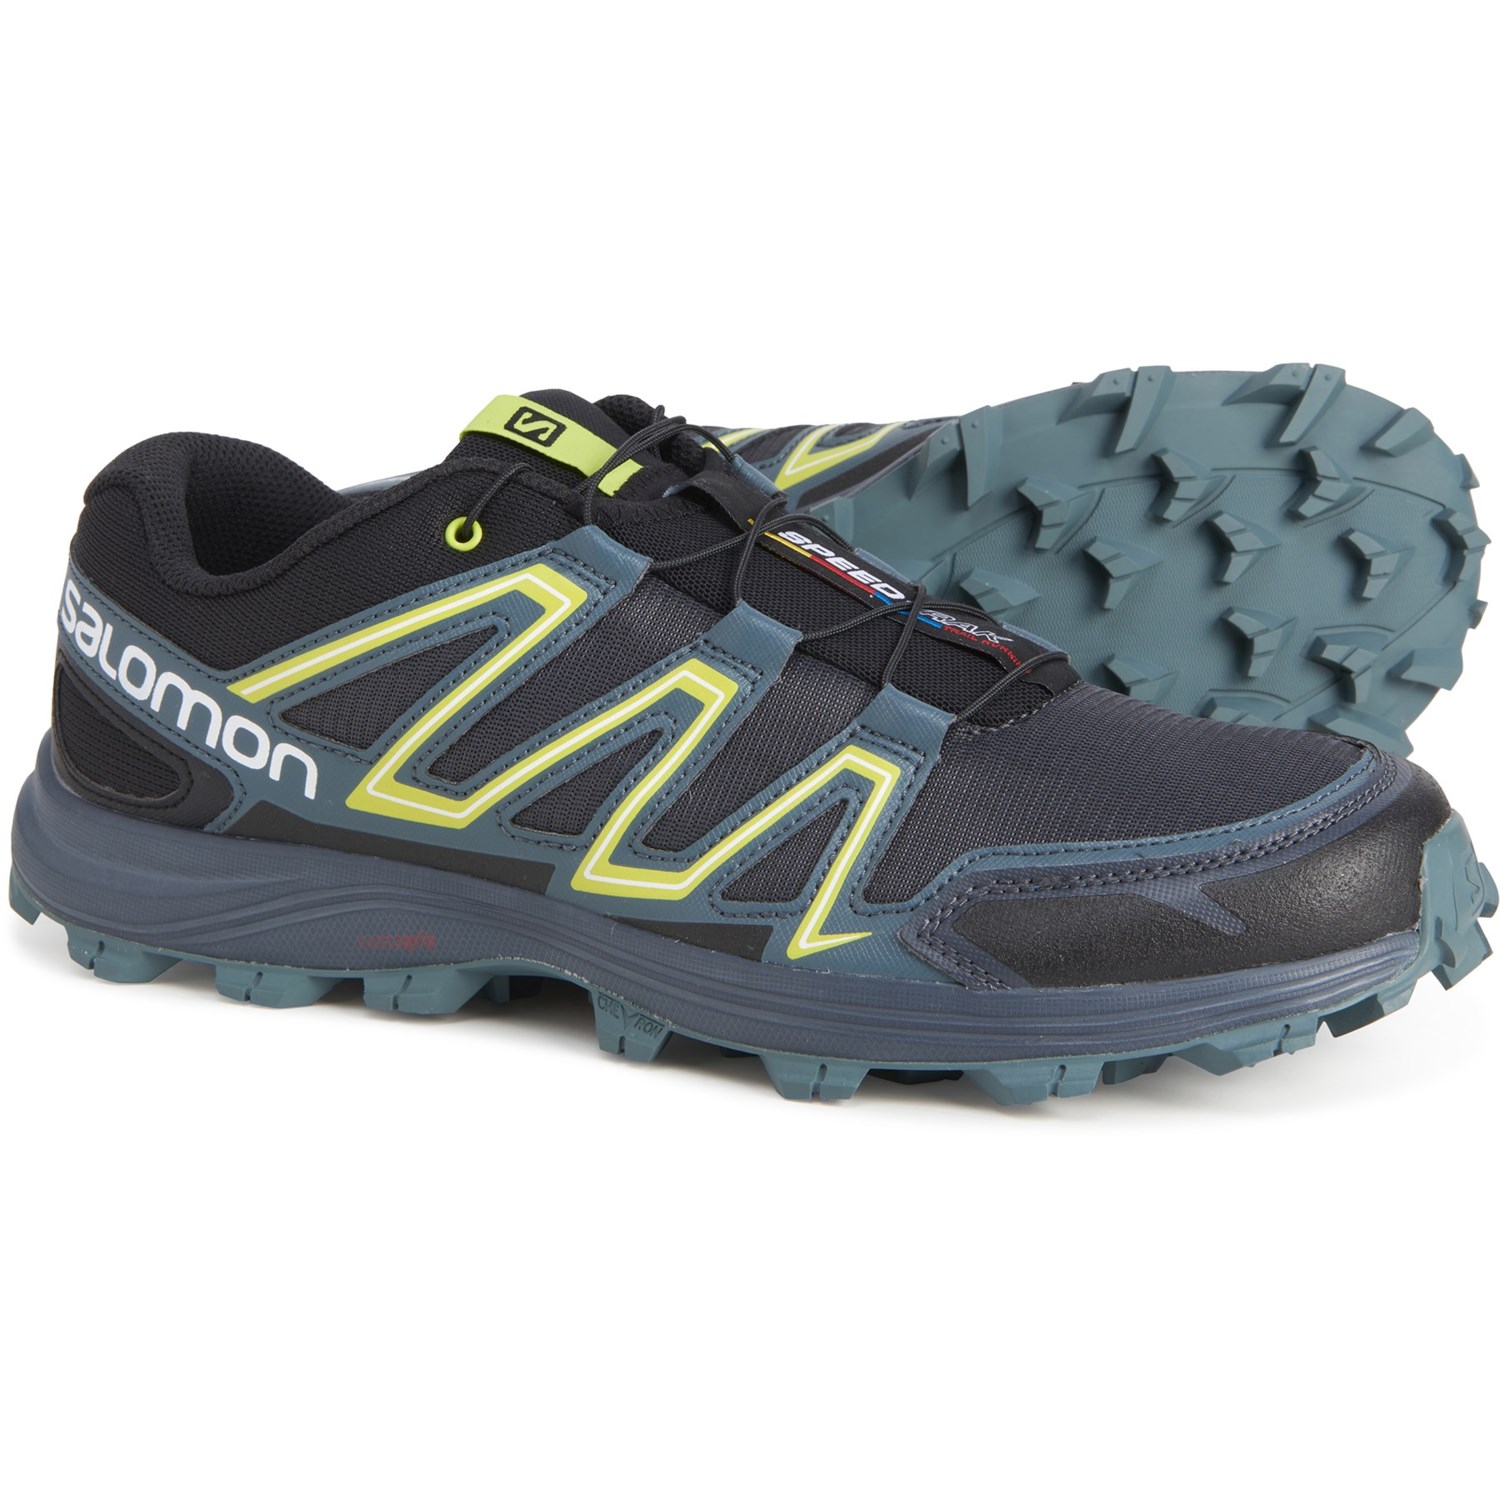 innovate trail running shoes